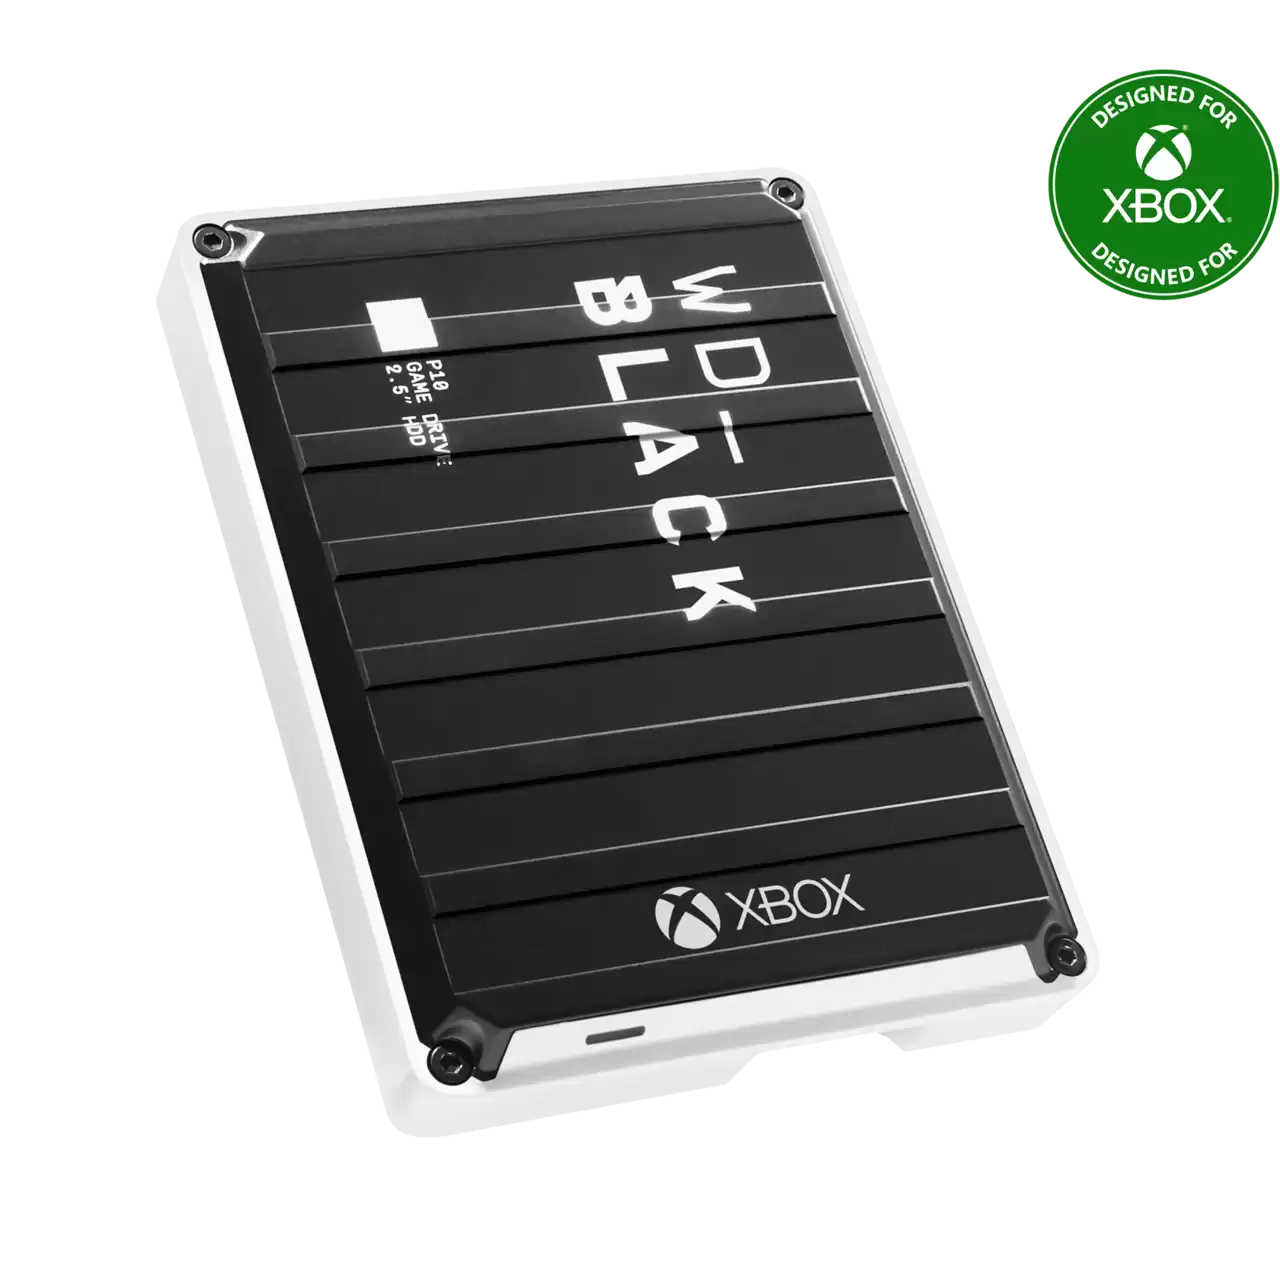 WD_BLACK P10 Game Drive for Xbox